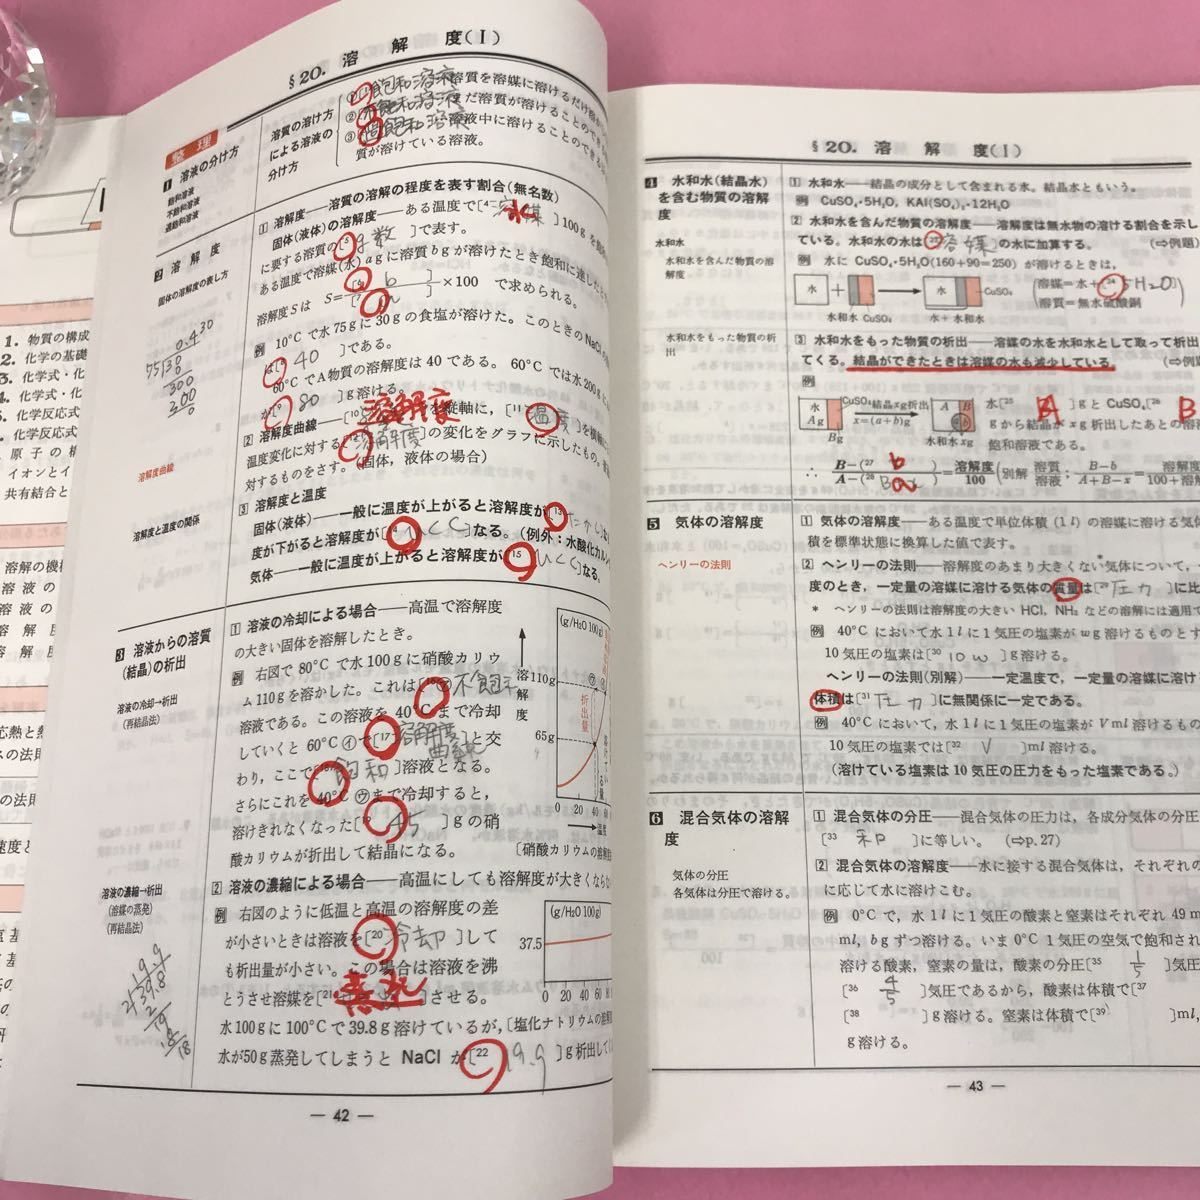 A61-149 新課程・記入式 整理と演習 詳解シグマノート 化学 文英堂編集部・著 文英堂 書き込み多数有り _画像7